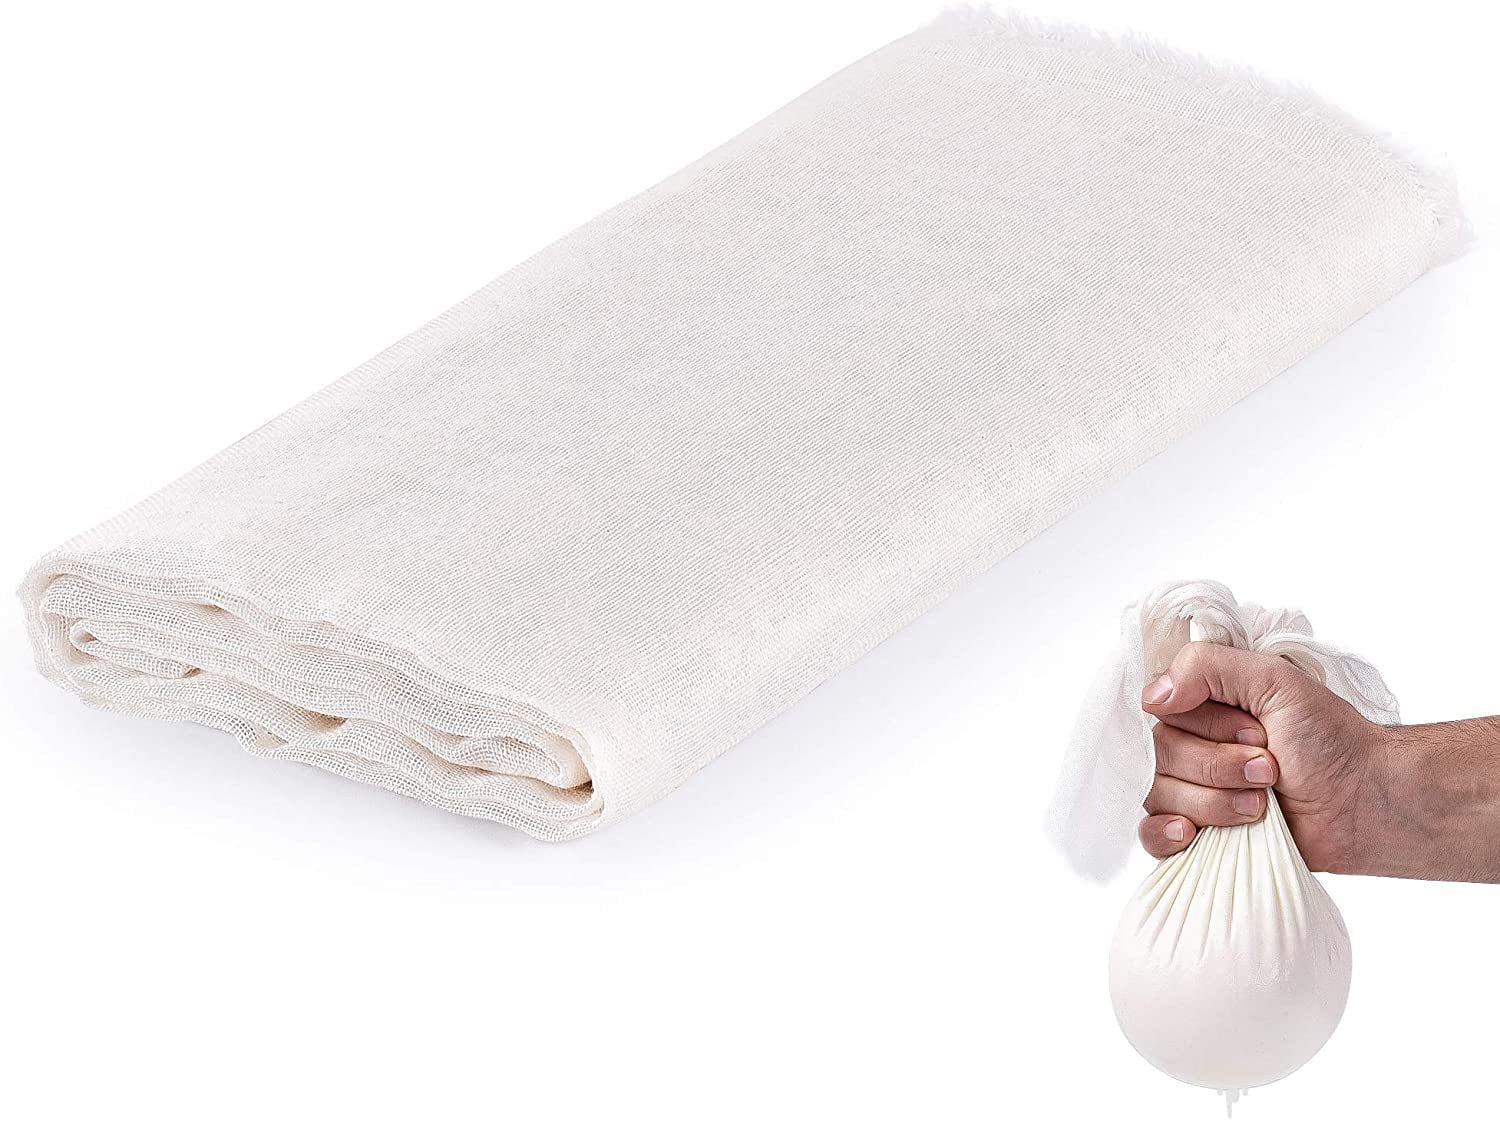 XelNaga 5 Pack Muslin Cloths Reusable for Straining, 100% Unbleached Pure  Cotton Cheesecloth, Soft Square Cheese Clothes Weave Fabric Filter for